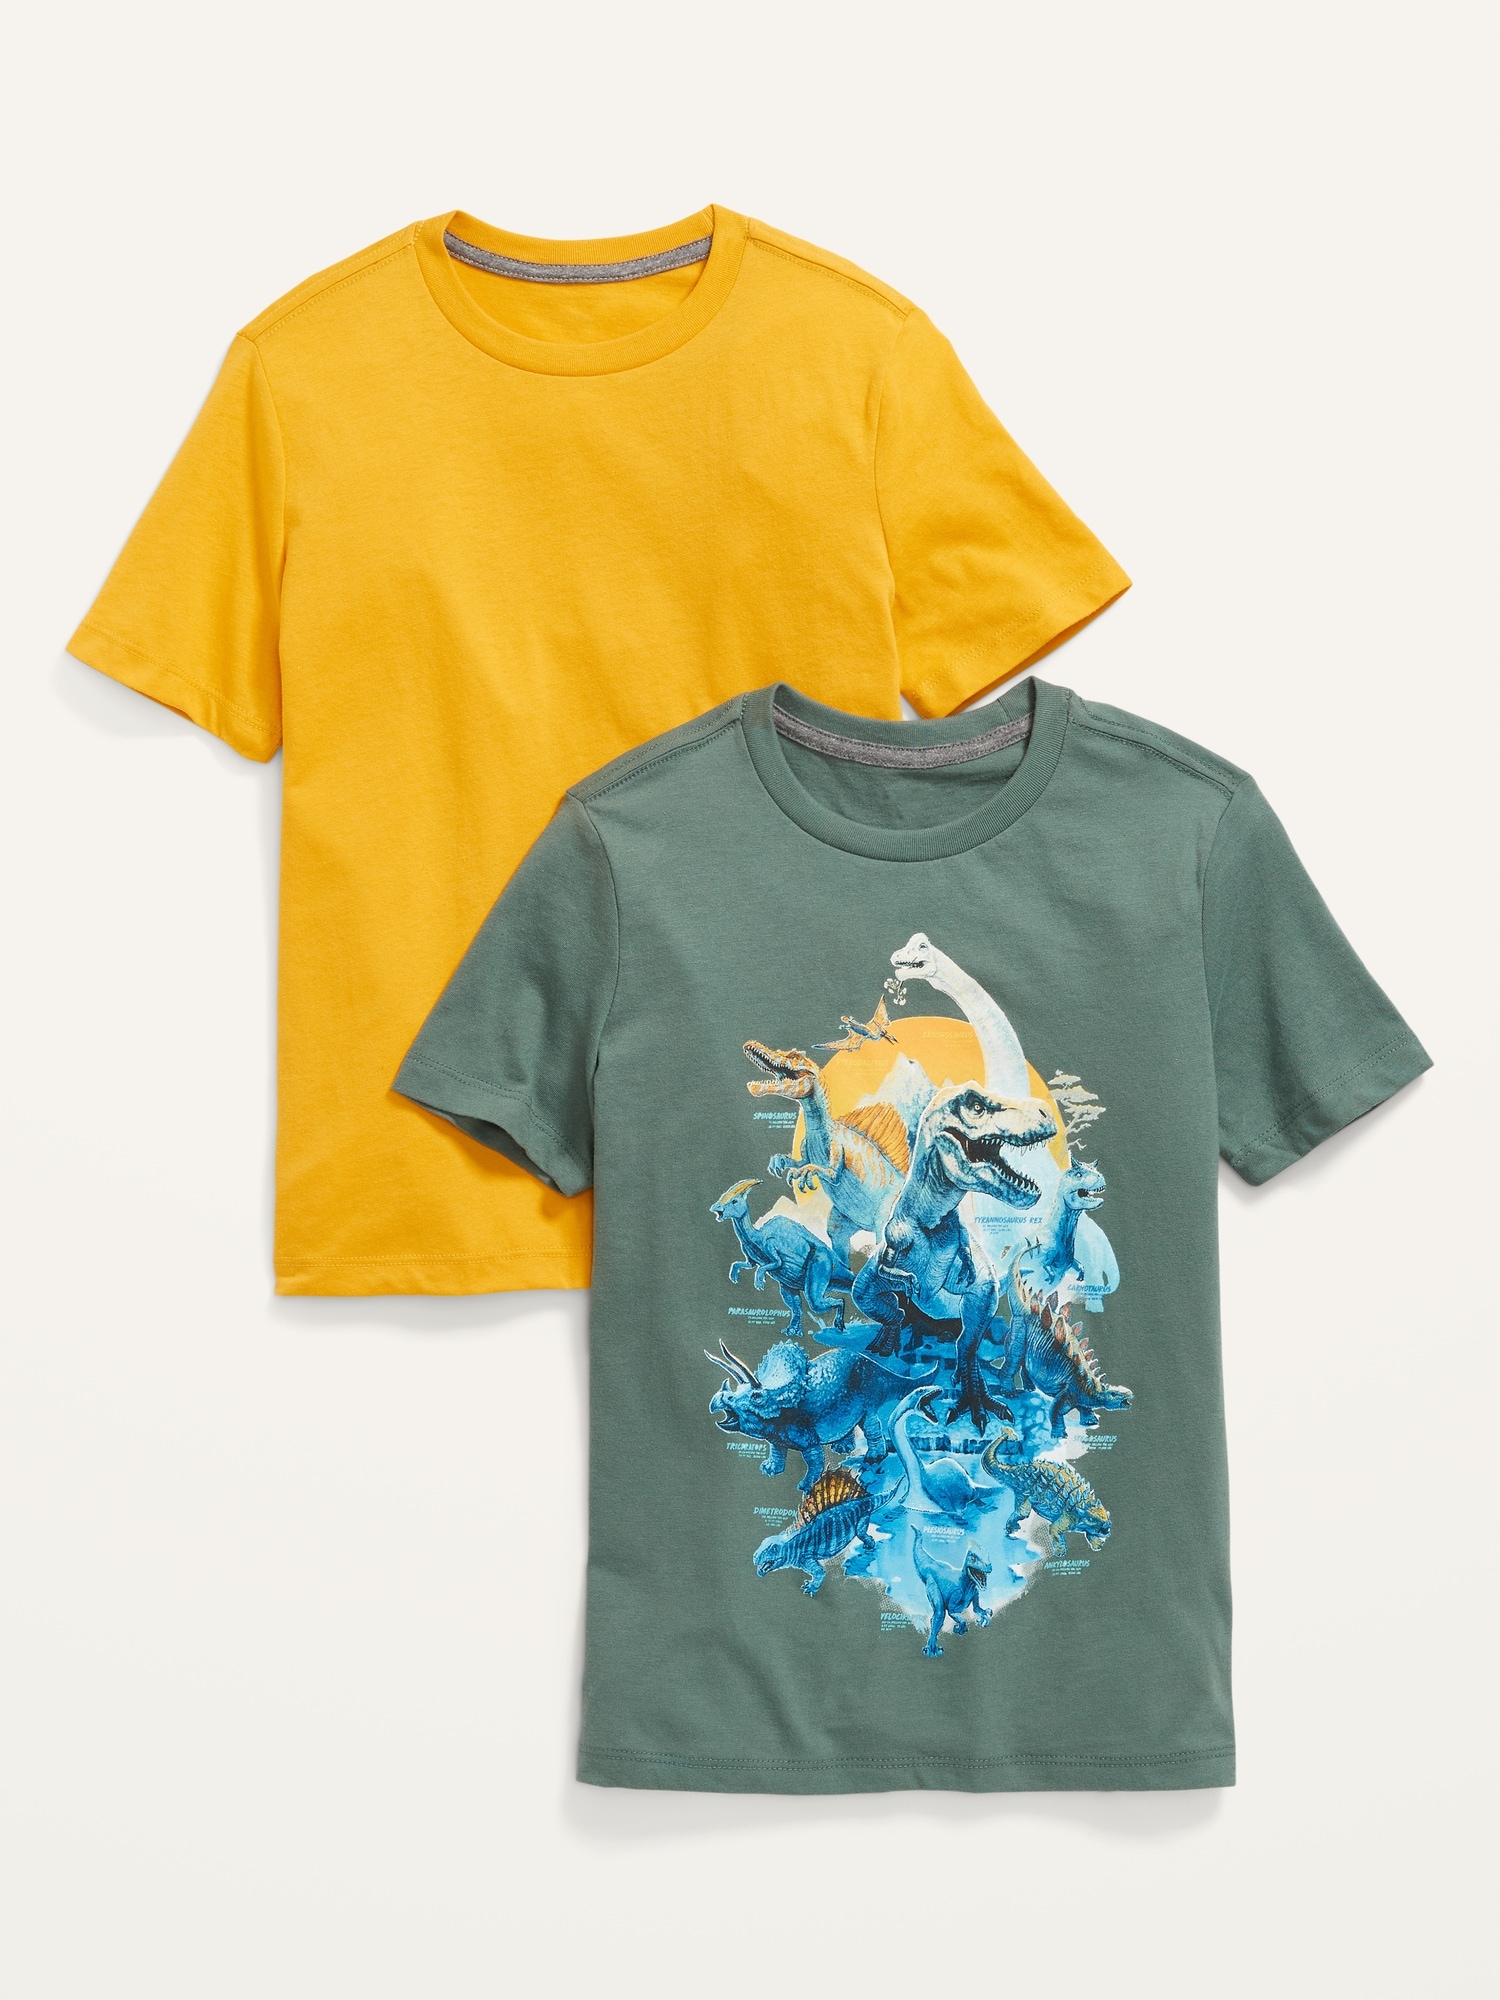 Short-Sleeve Graphic T-Shirt 2-Pack For Boys | Old Navy